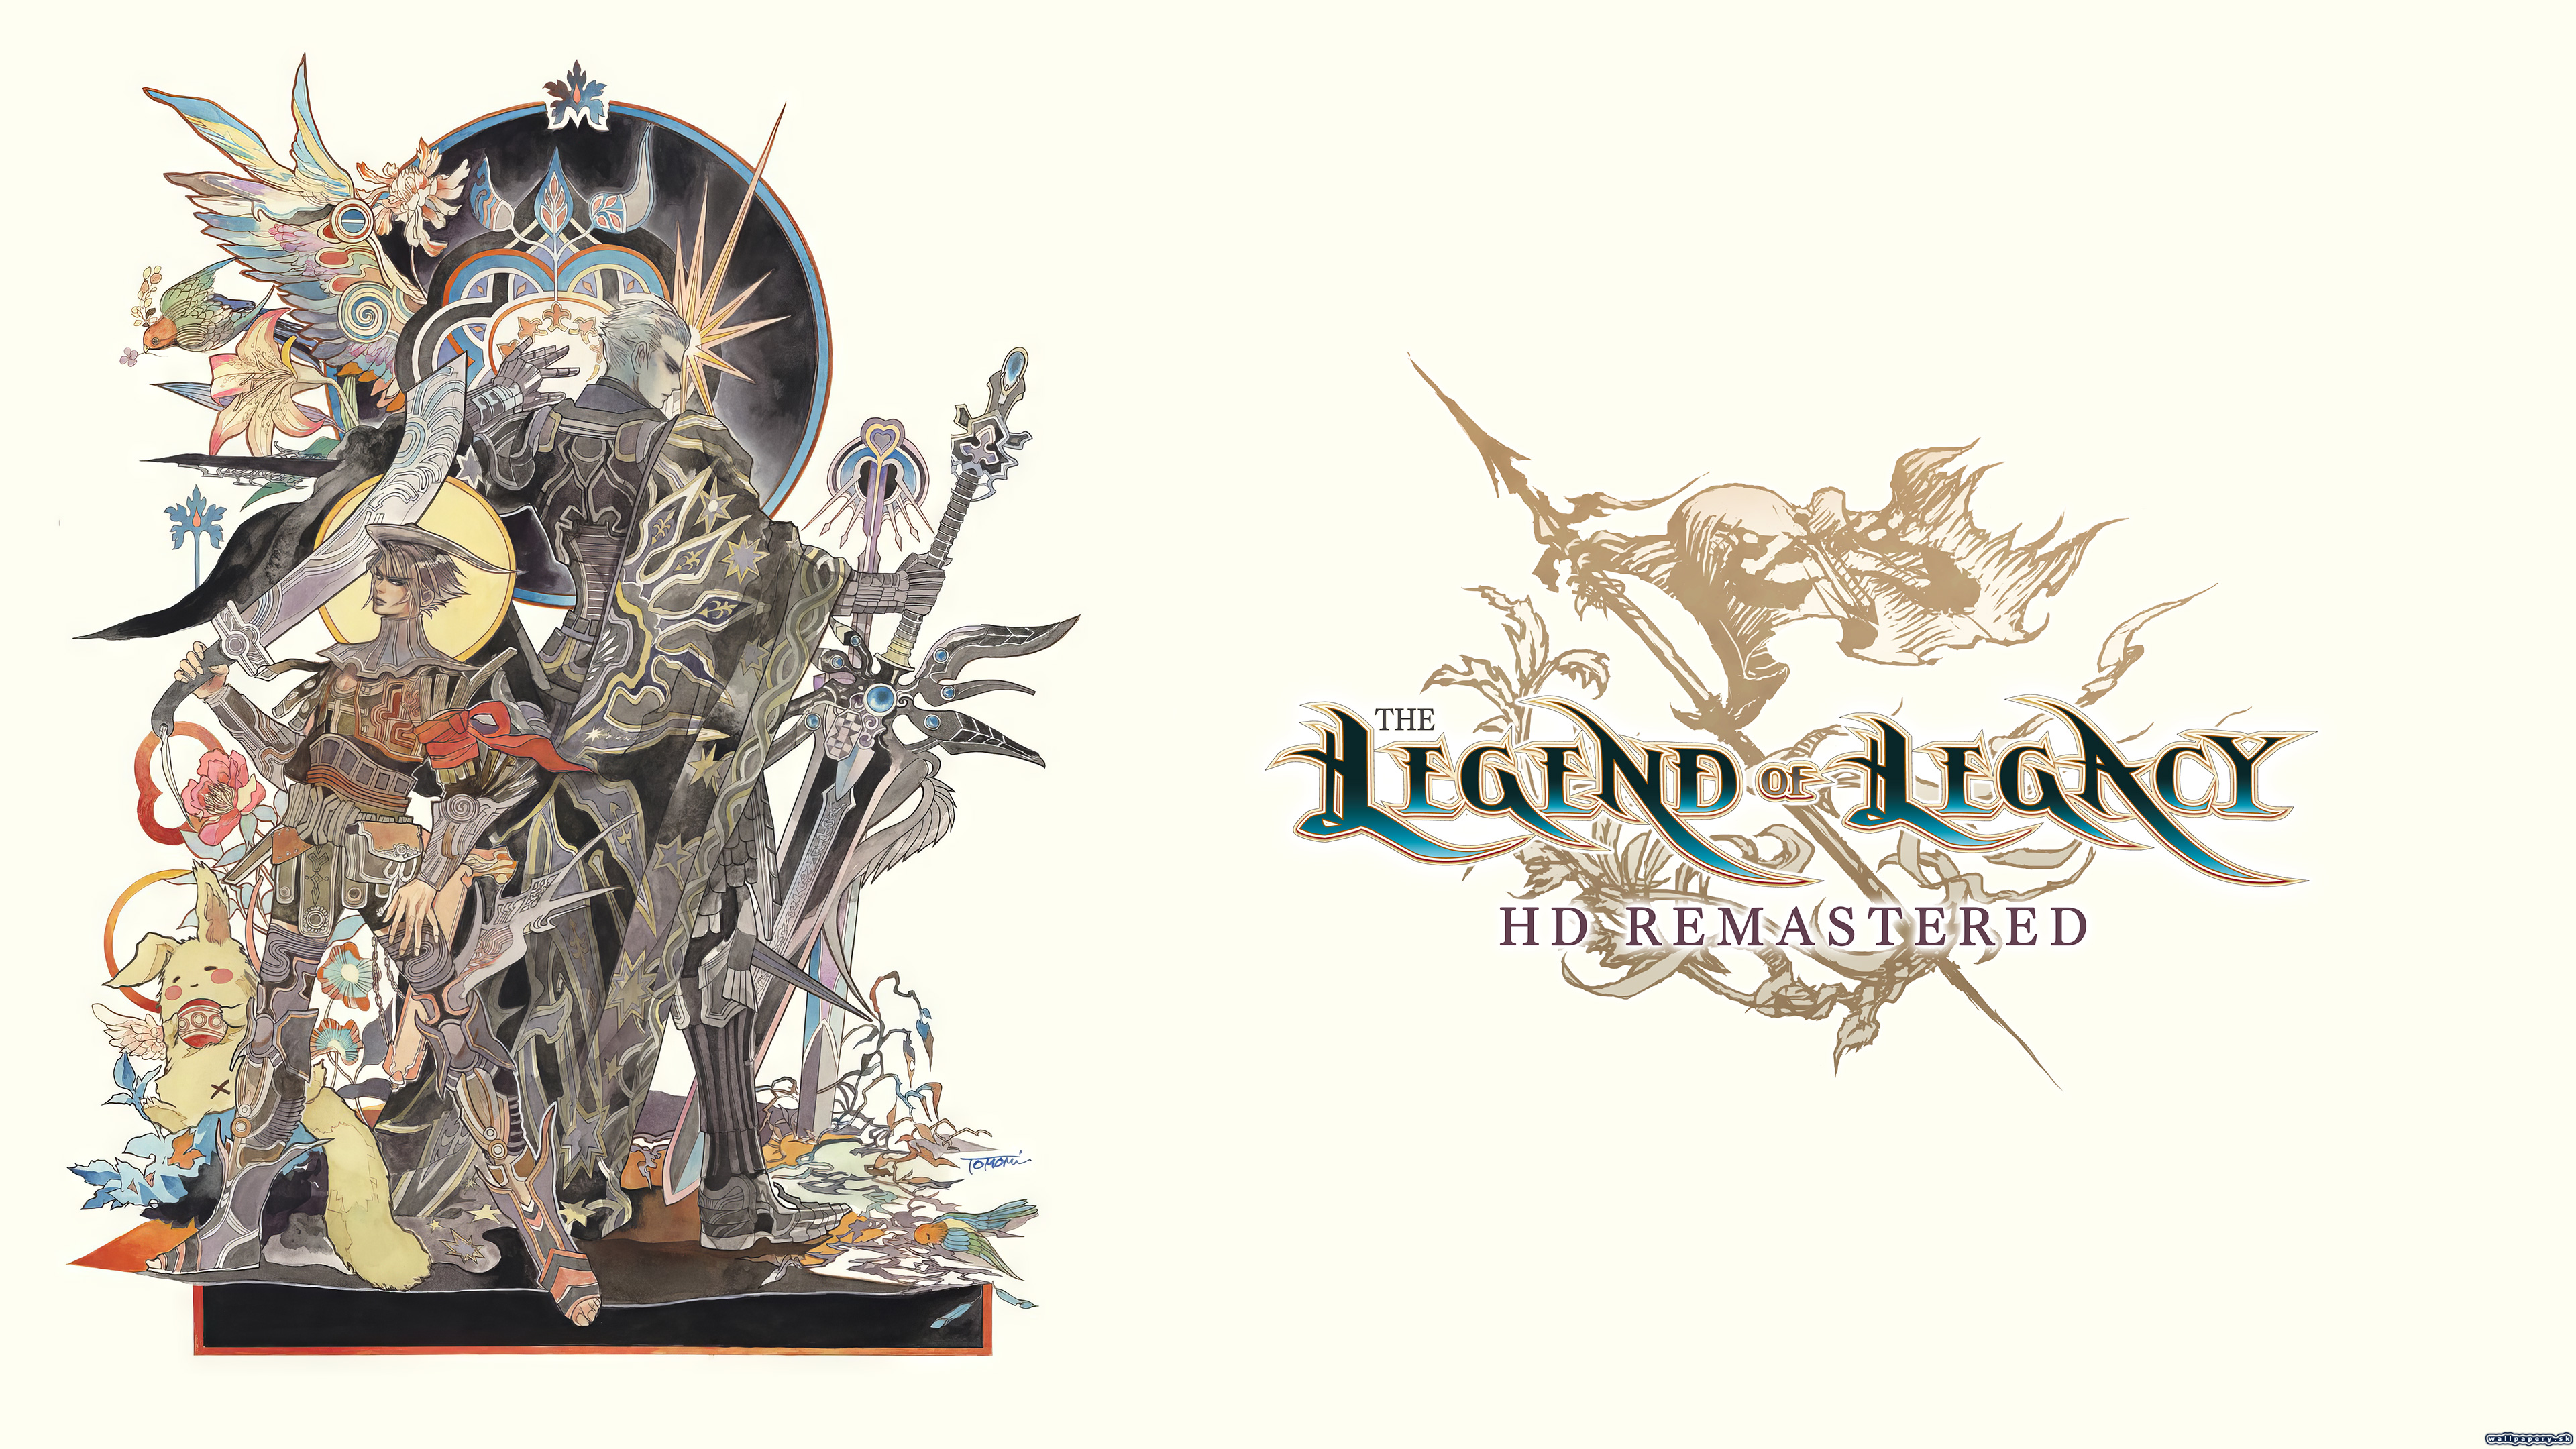 The Legend of Legacy HD Remastered - wallpaper 2